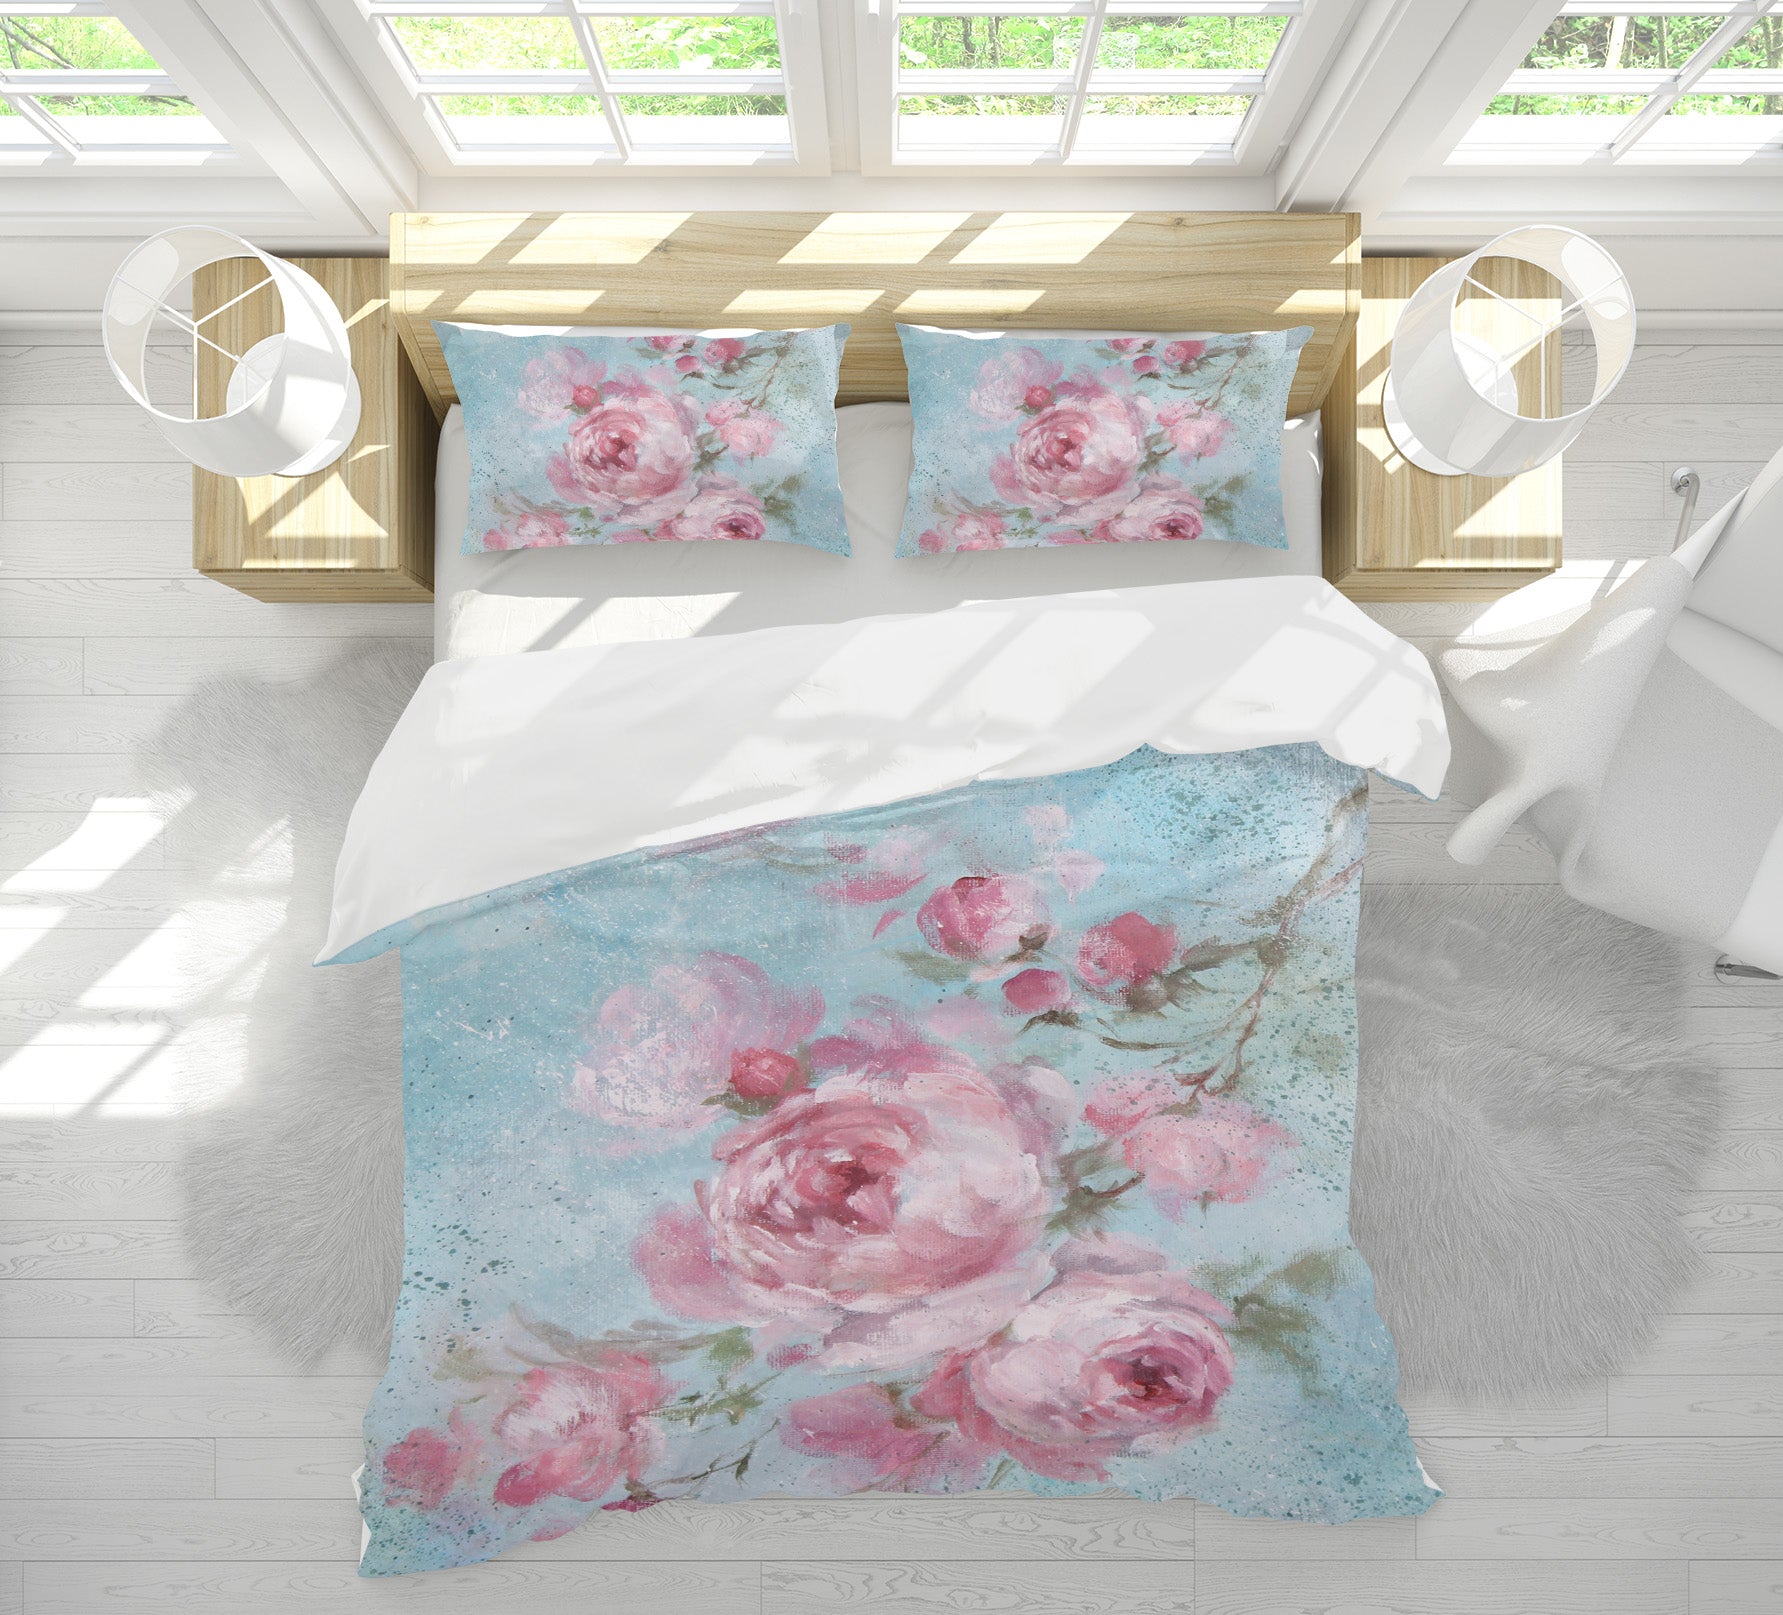 3D Pink Rose 2062 Debi Coules Bedding Bed Pillowcases Quilt